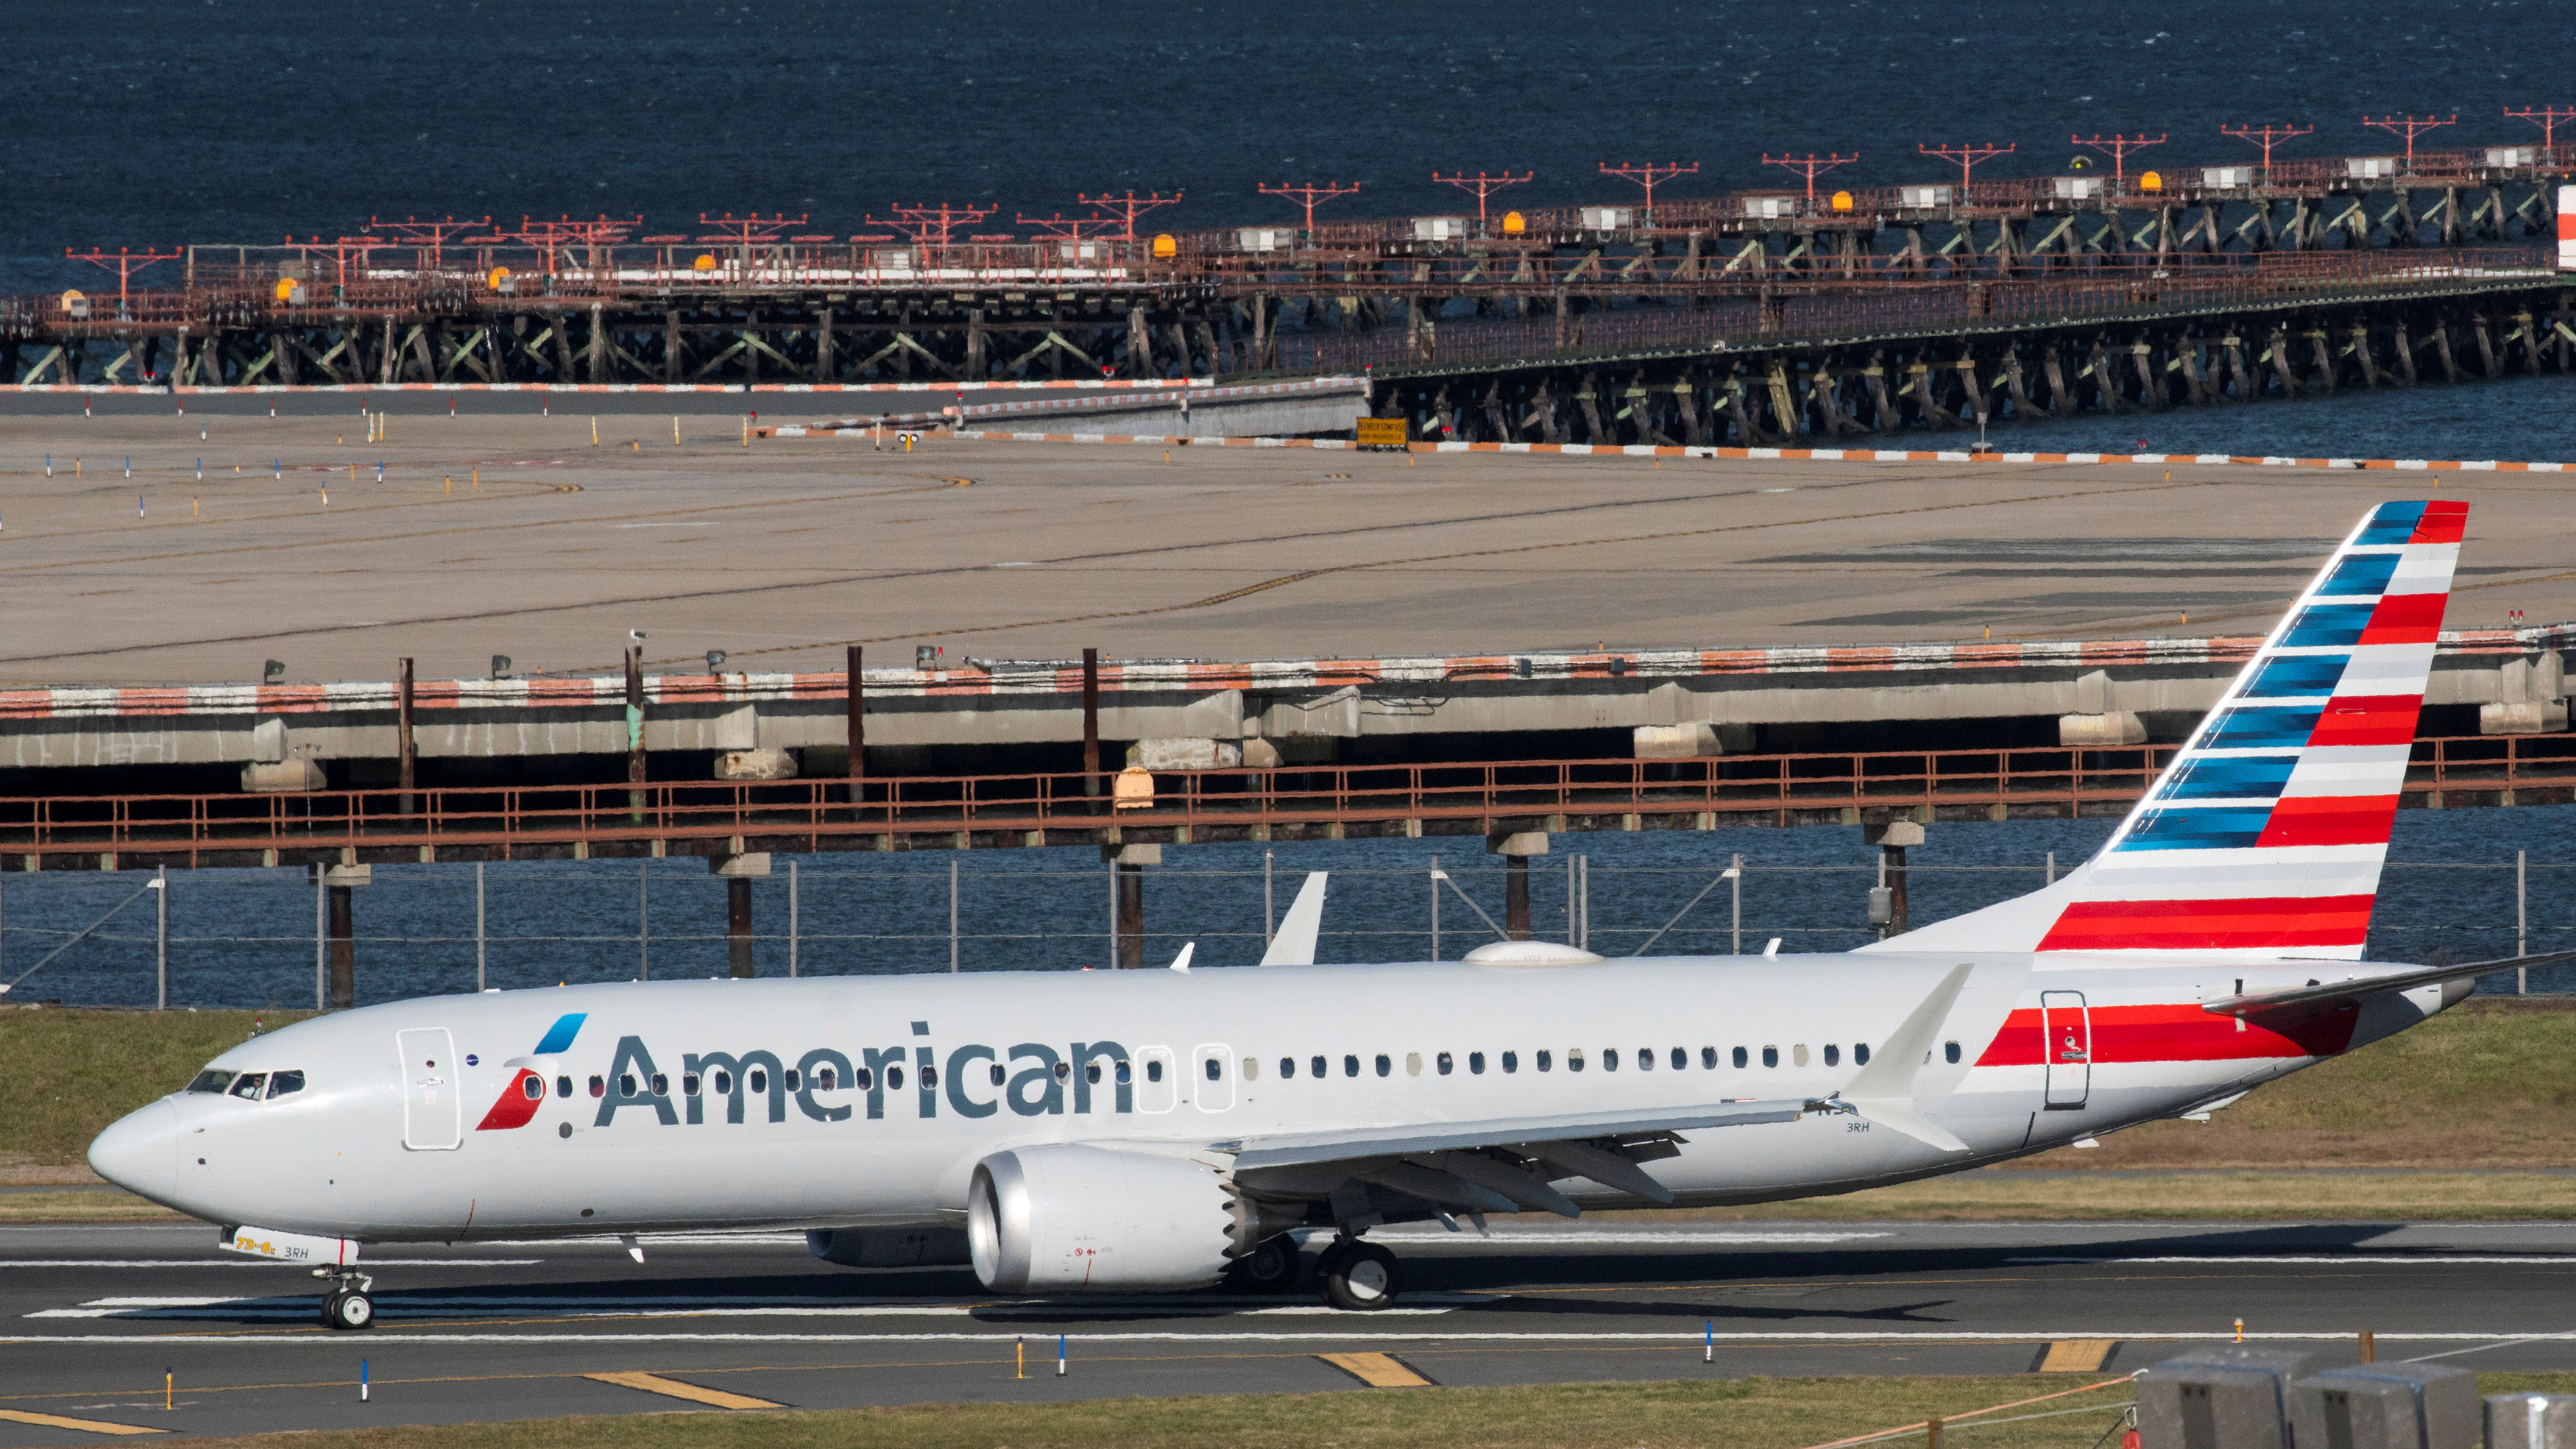 American Airlines readies more jets to meet rising demand